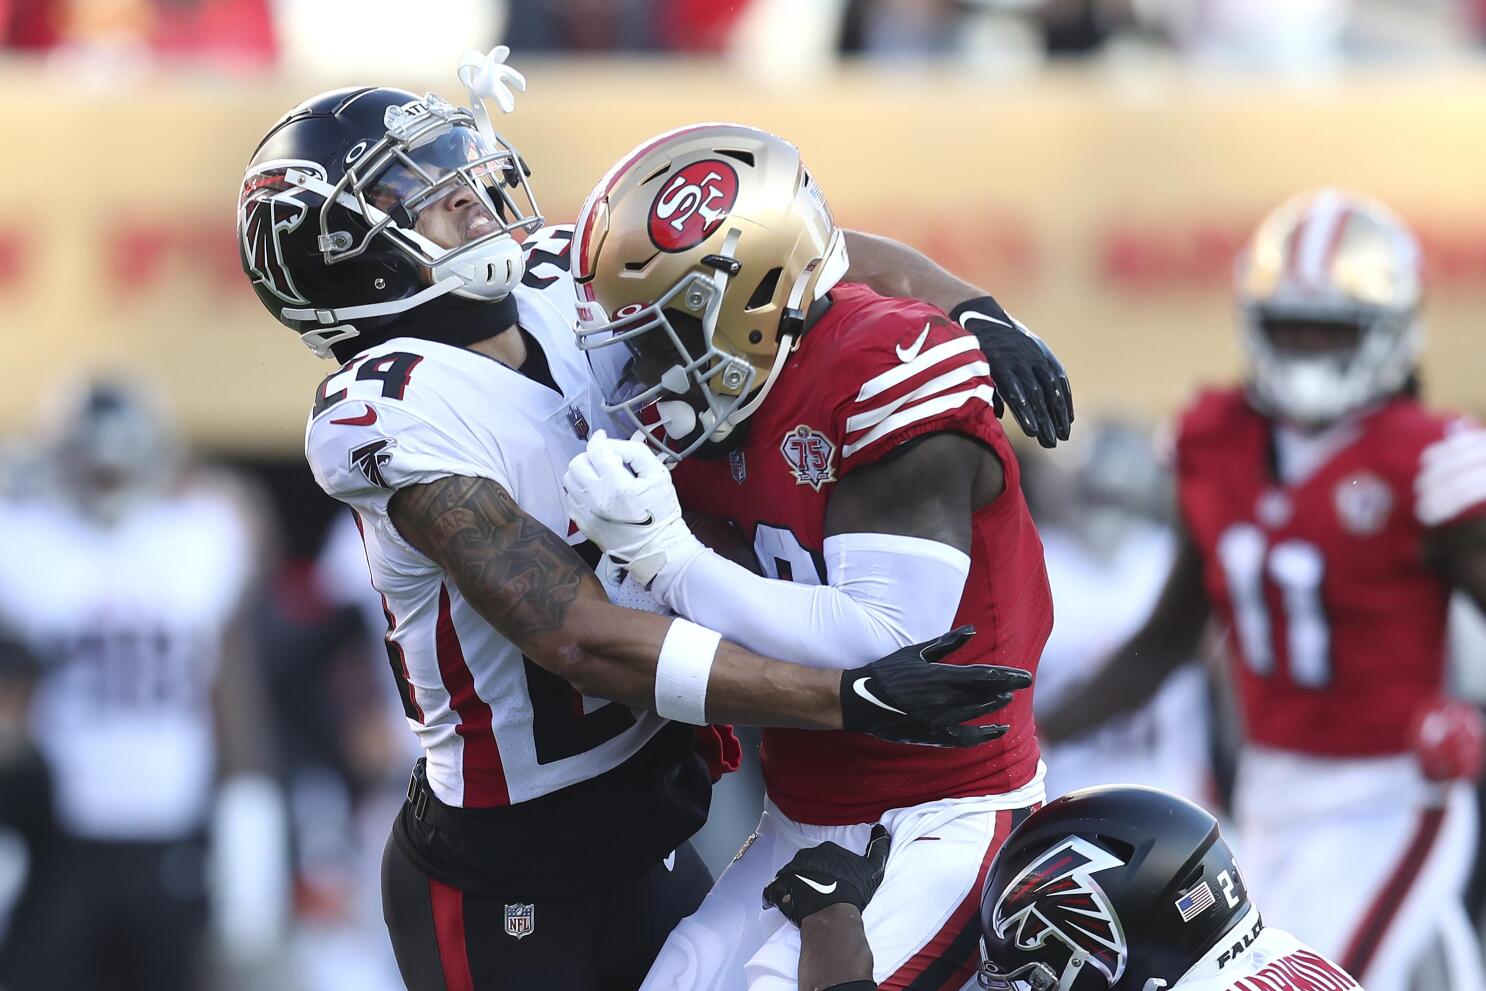 49ers look to bounce back in home finale vs. Texans